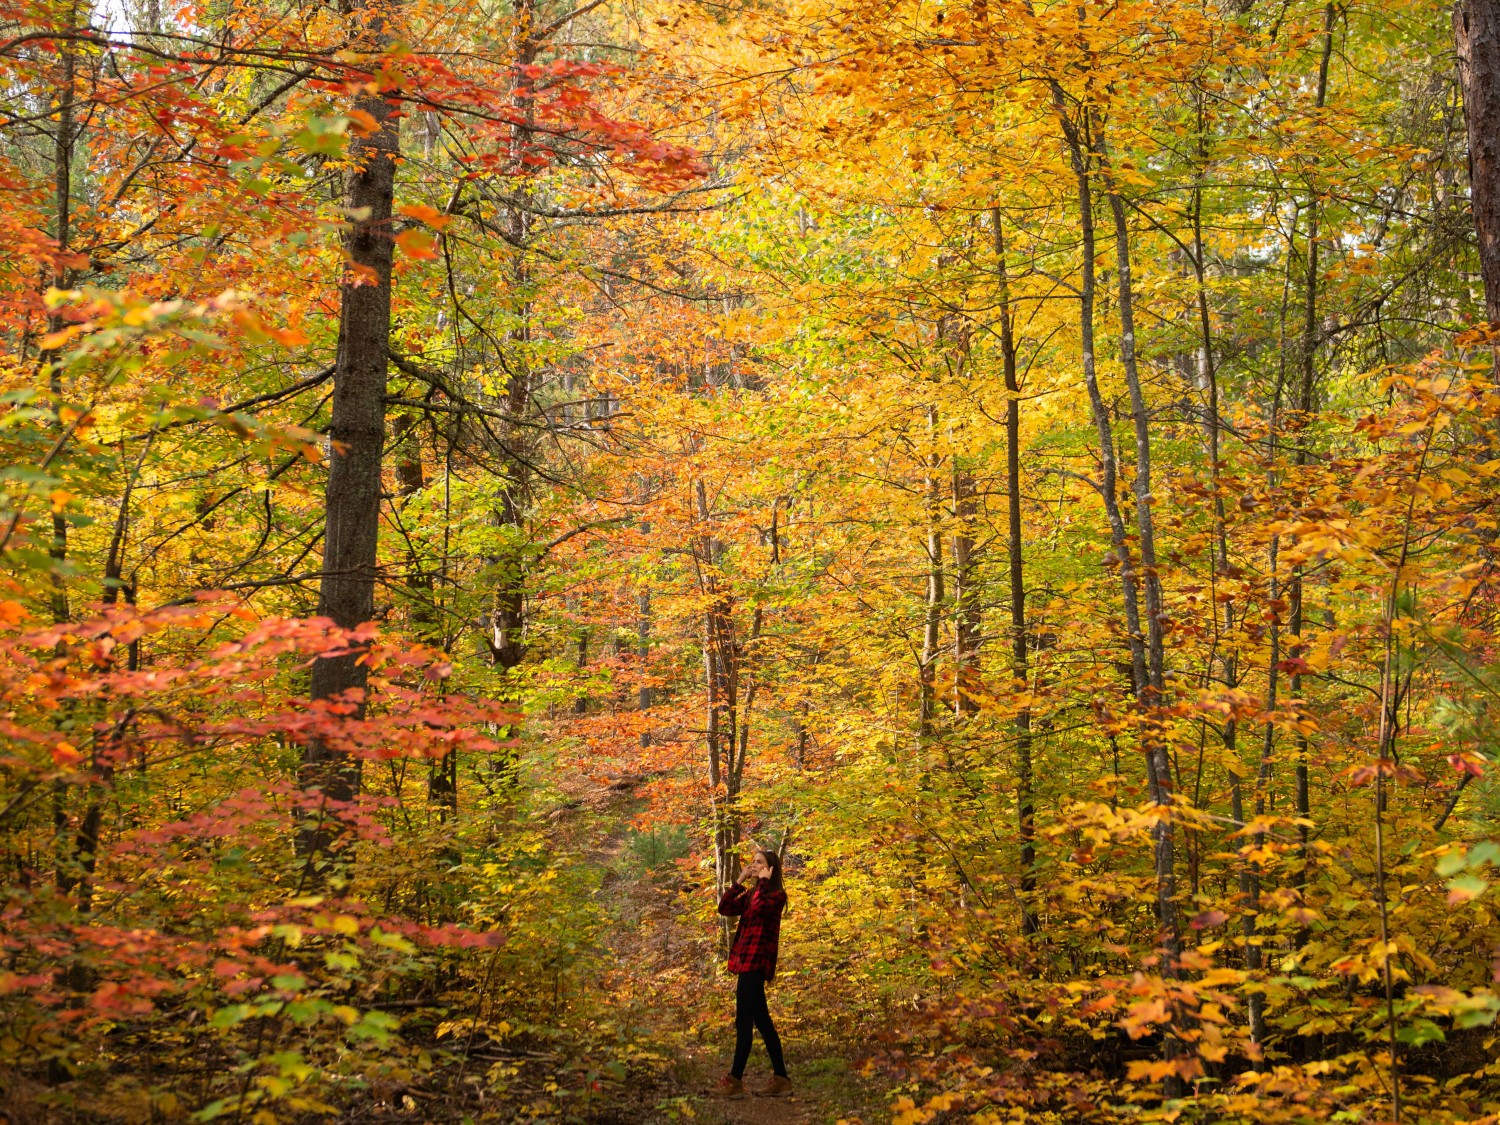 A person standing on a hiking trail in the mid-distance. They are surrounded by tall trees whose leaves have changes to red, orange and yellow.